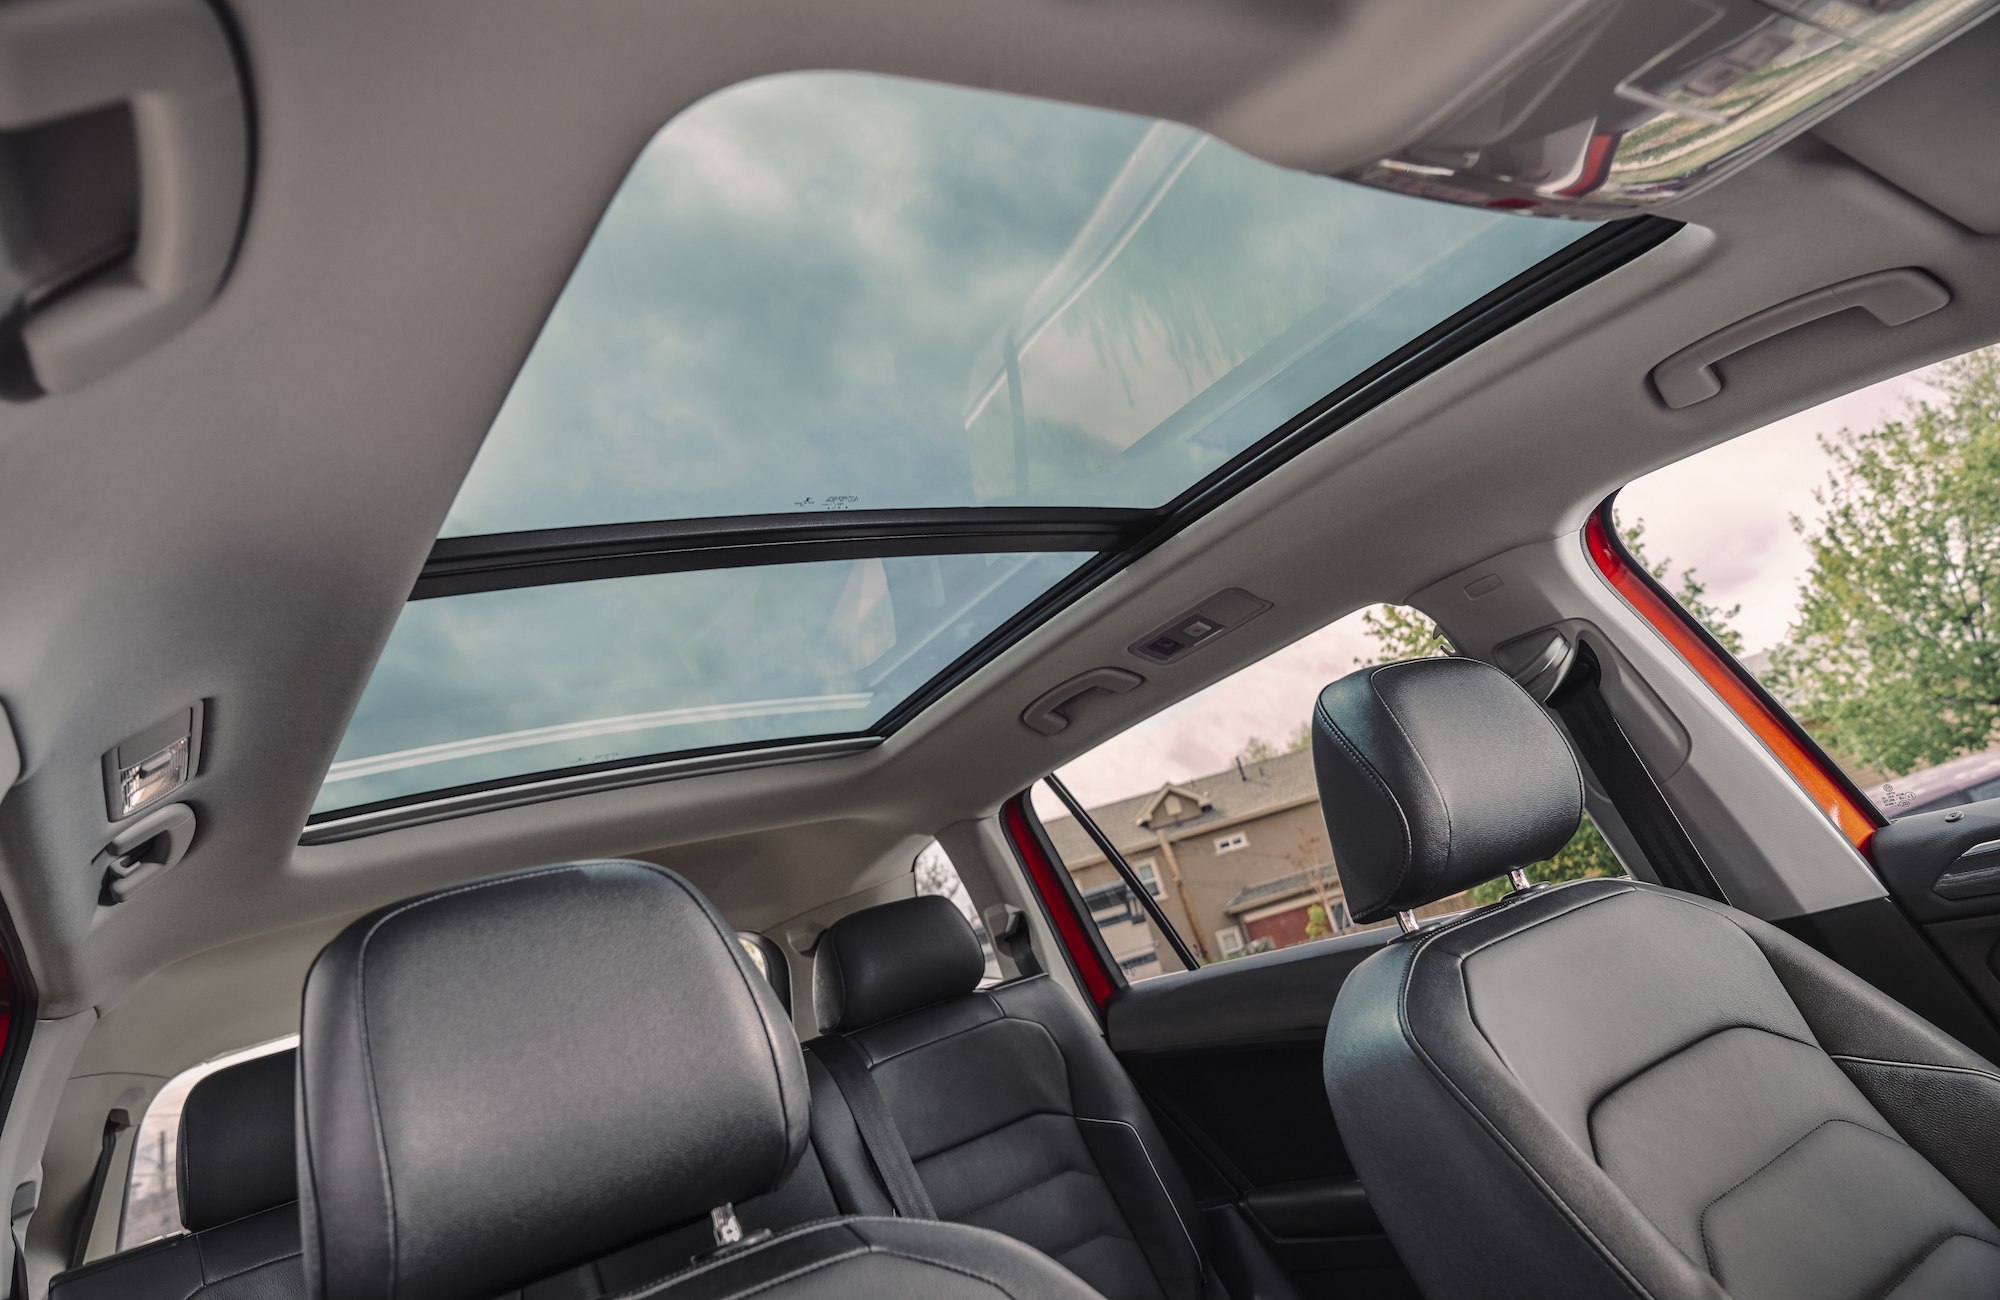 Why You Should Never Get A Car With A Panoramic Sunroof